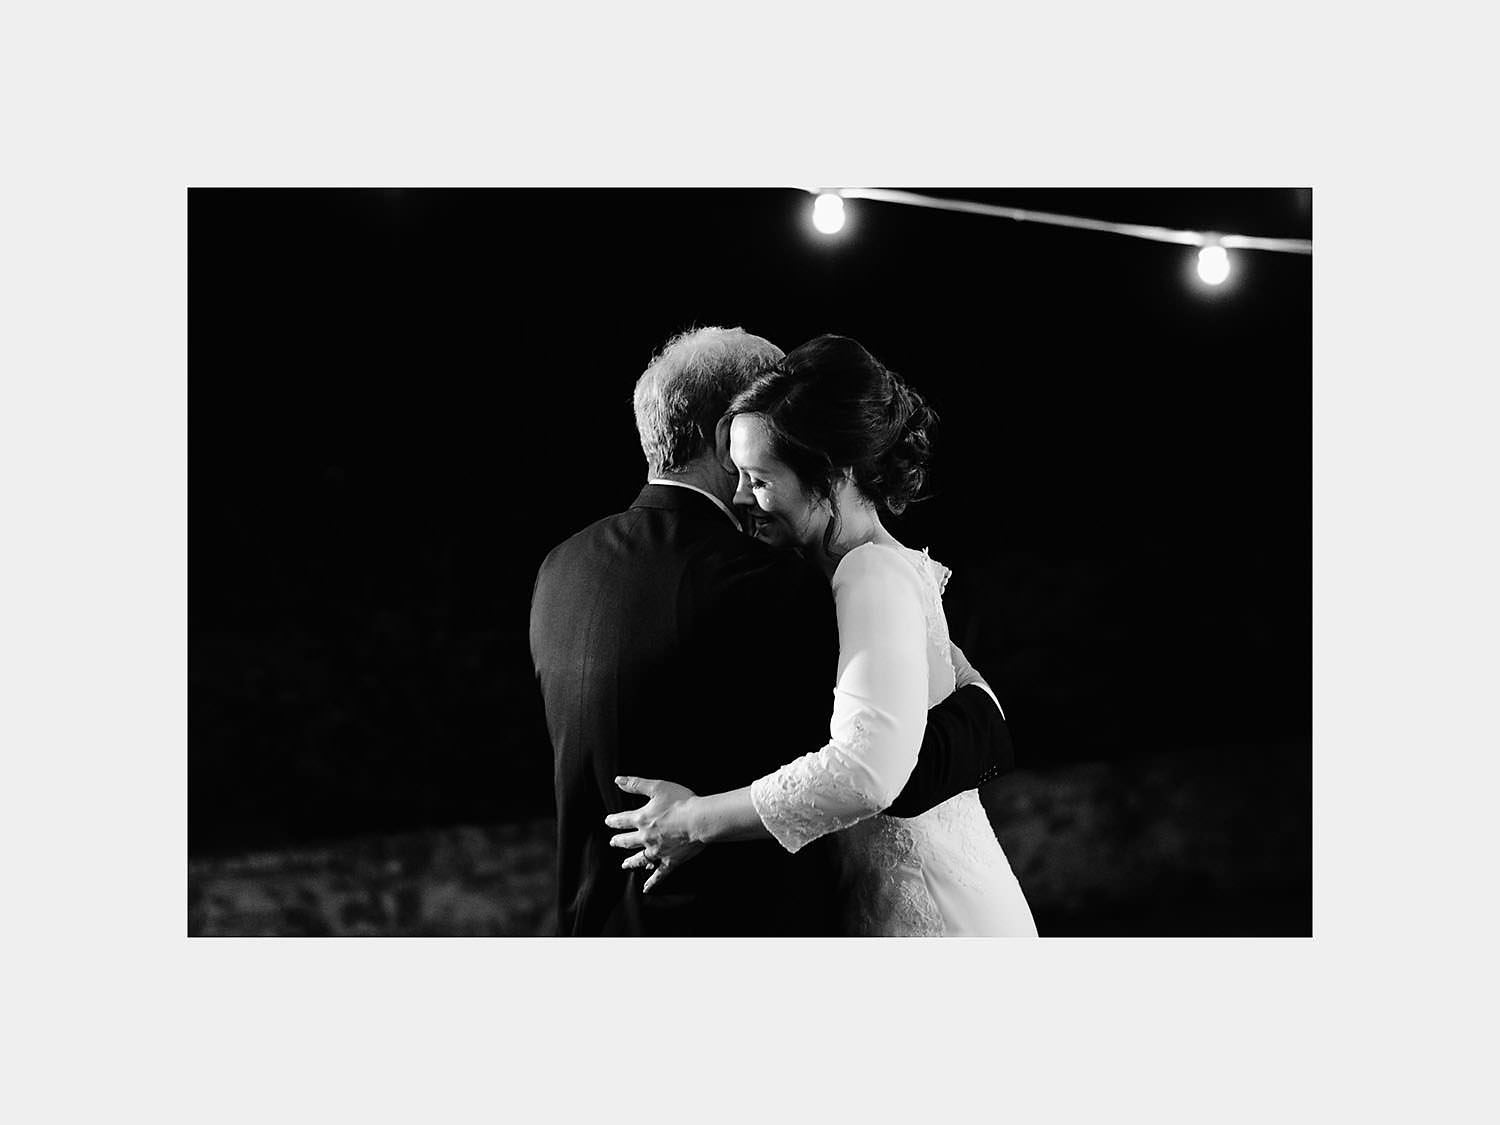 relaxing countryside wedding in tuscany first dance